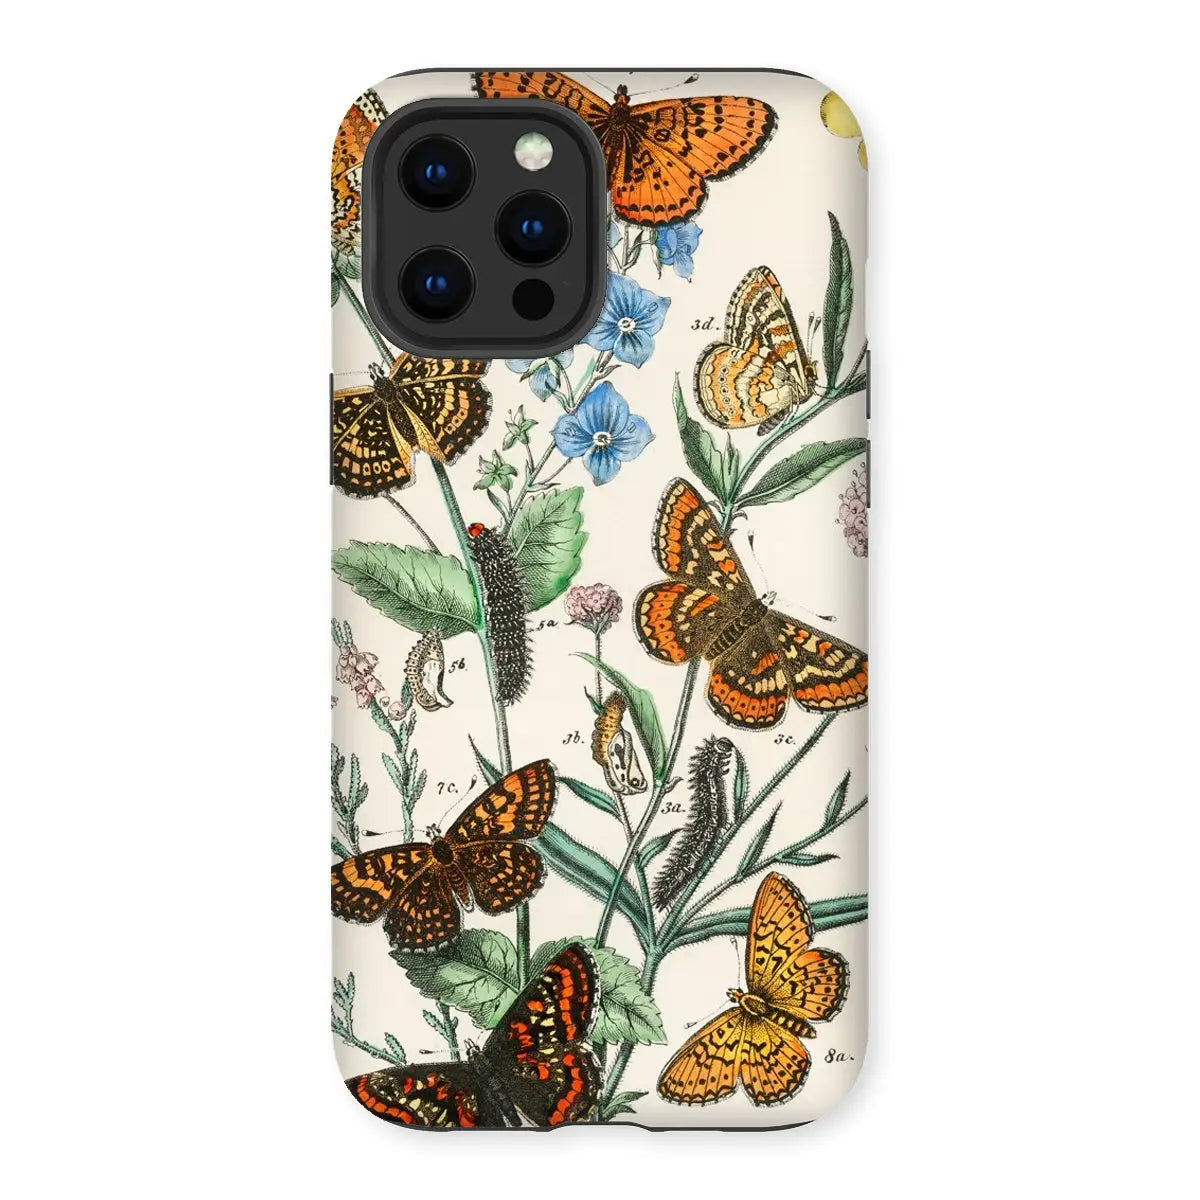 European Butterflies And Moths 2 Art Phone Case - William Forsell Kirby - Iphone 12 Pro Max / Matte - Mobile Phone